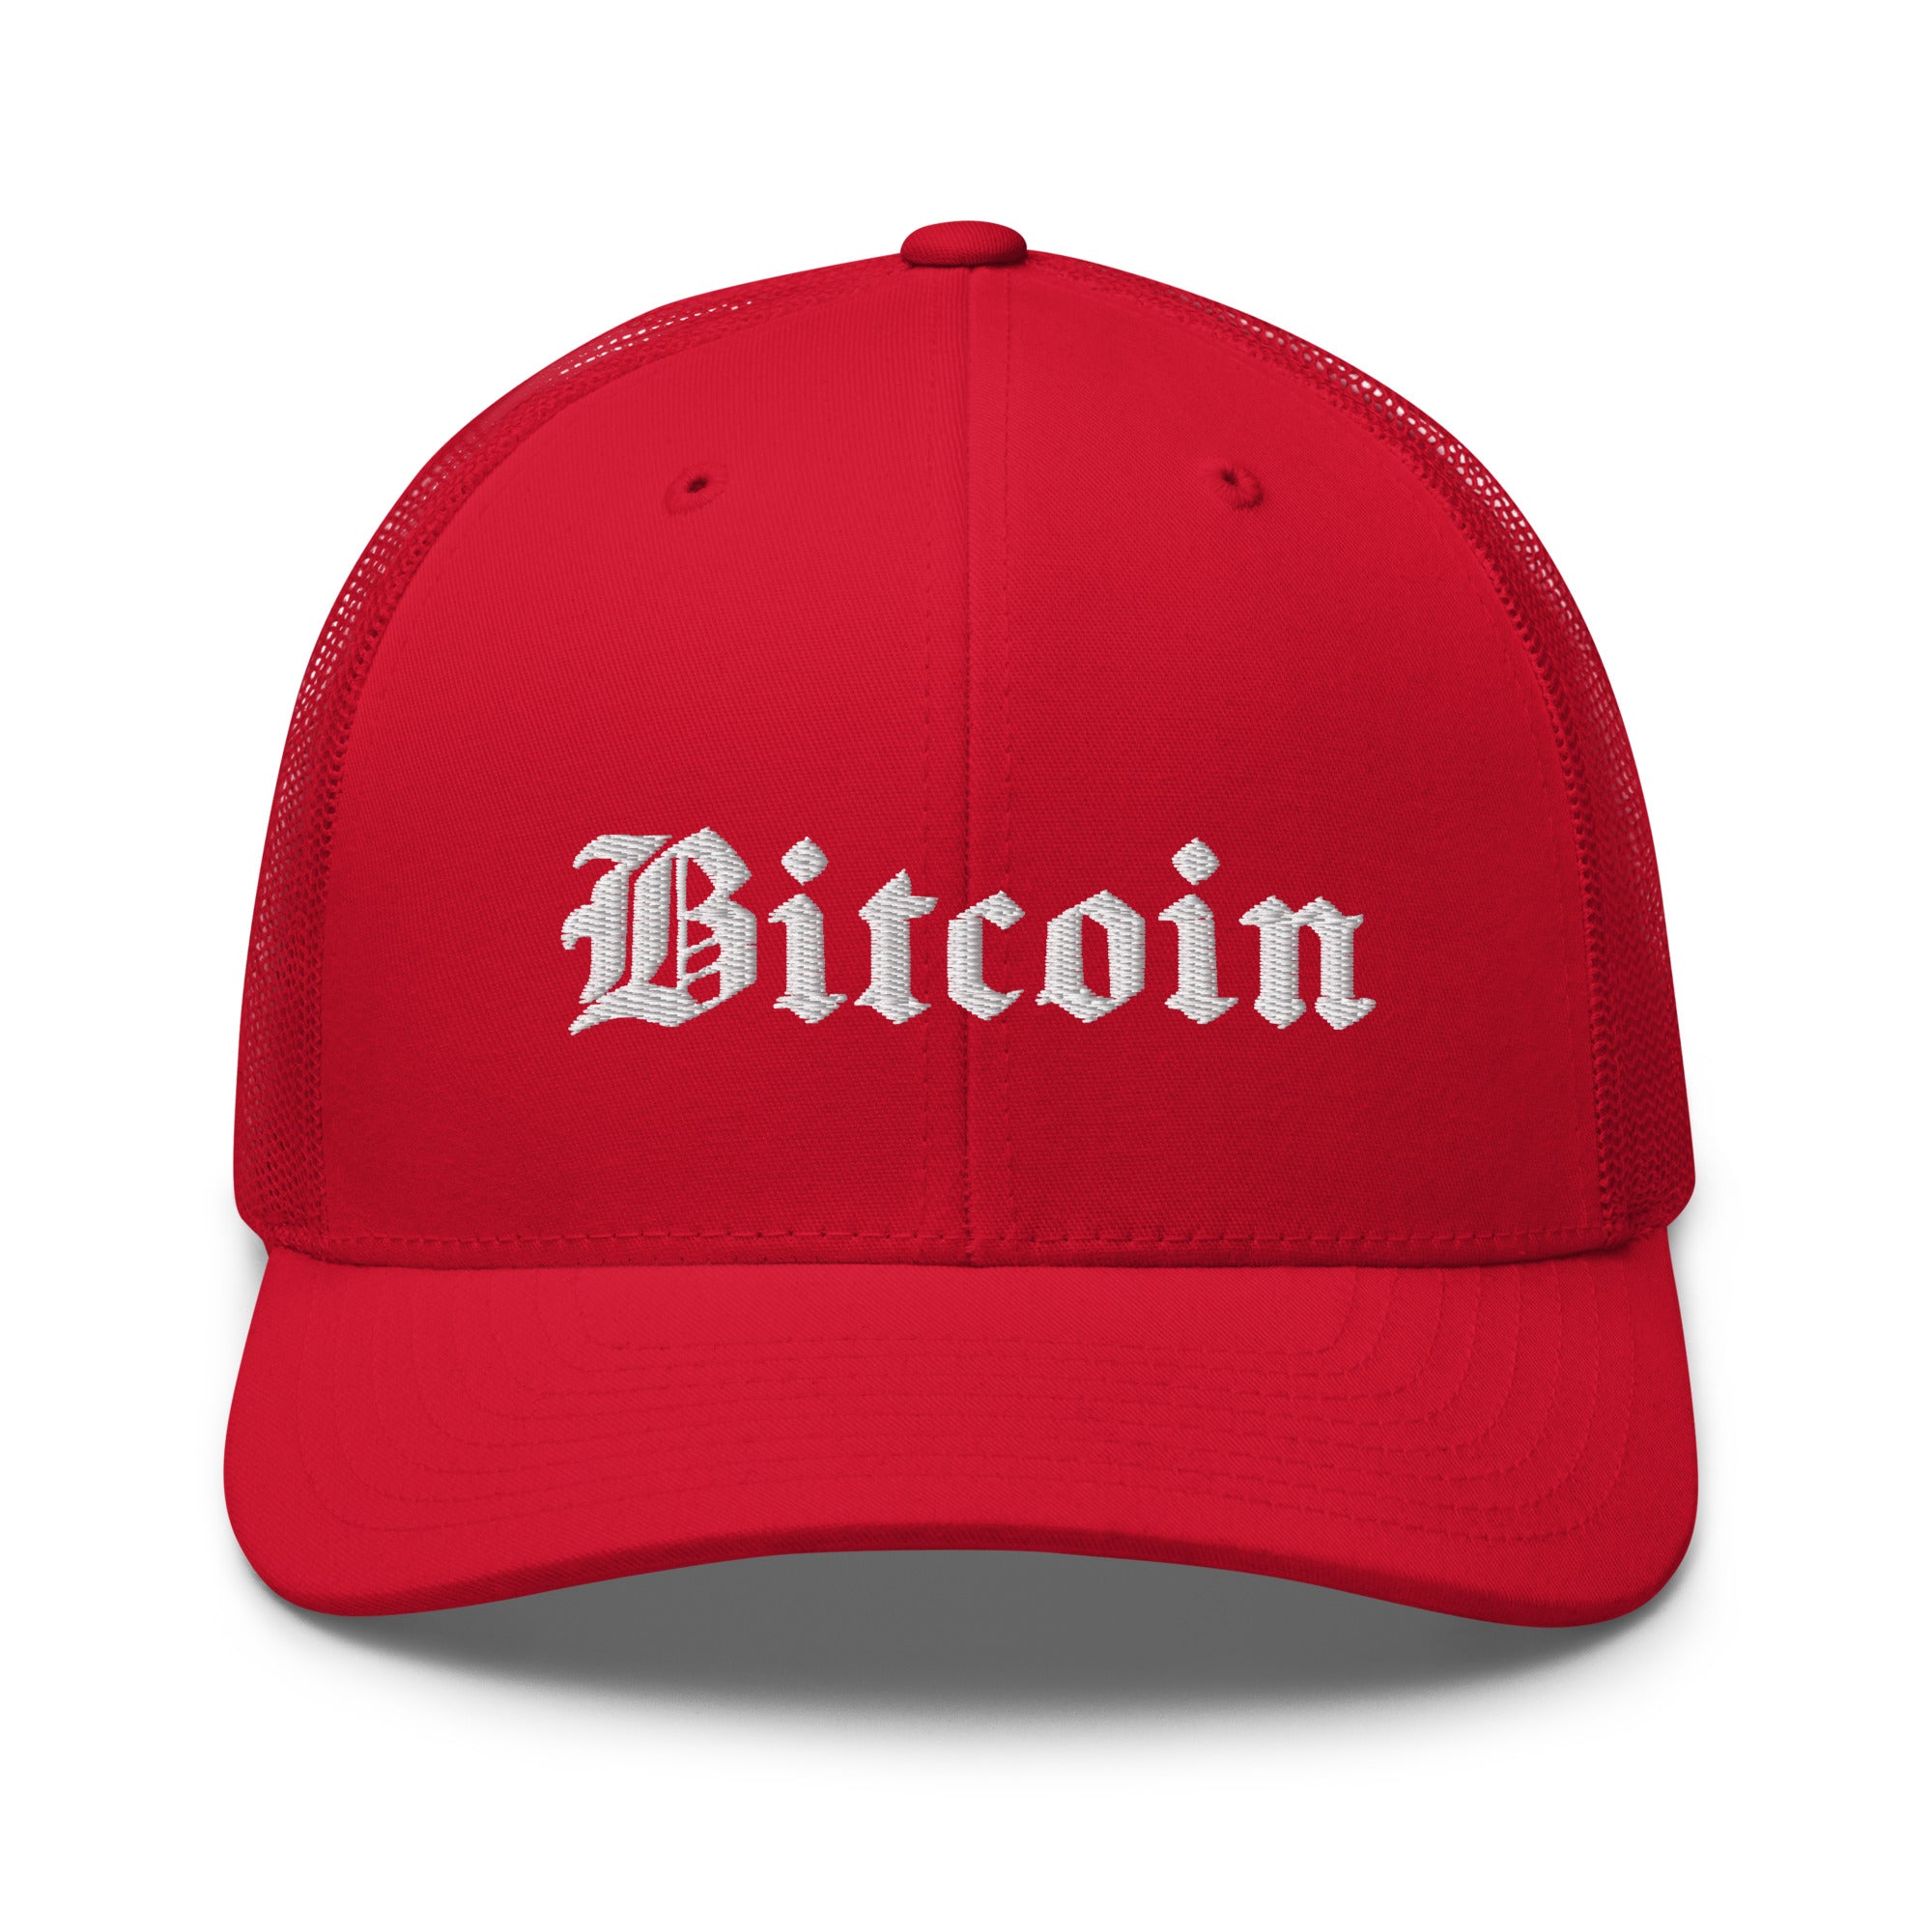 Bitcoin Hat - The Bitcoin Gothic Trucker Hat features a Gothic script design on a red cap. Front view.